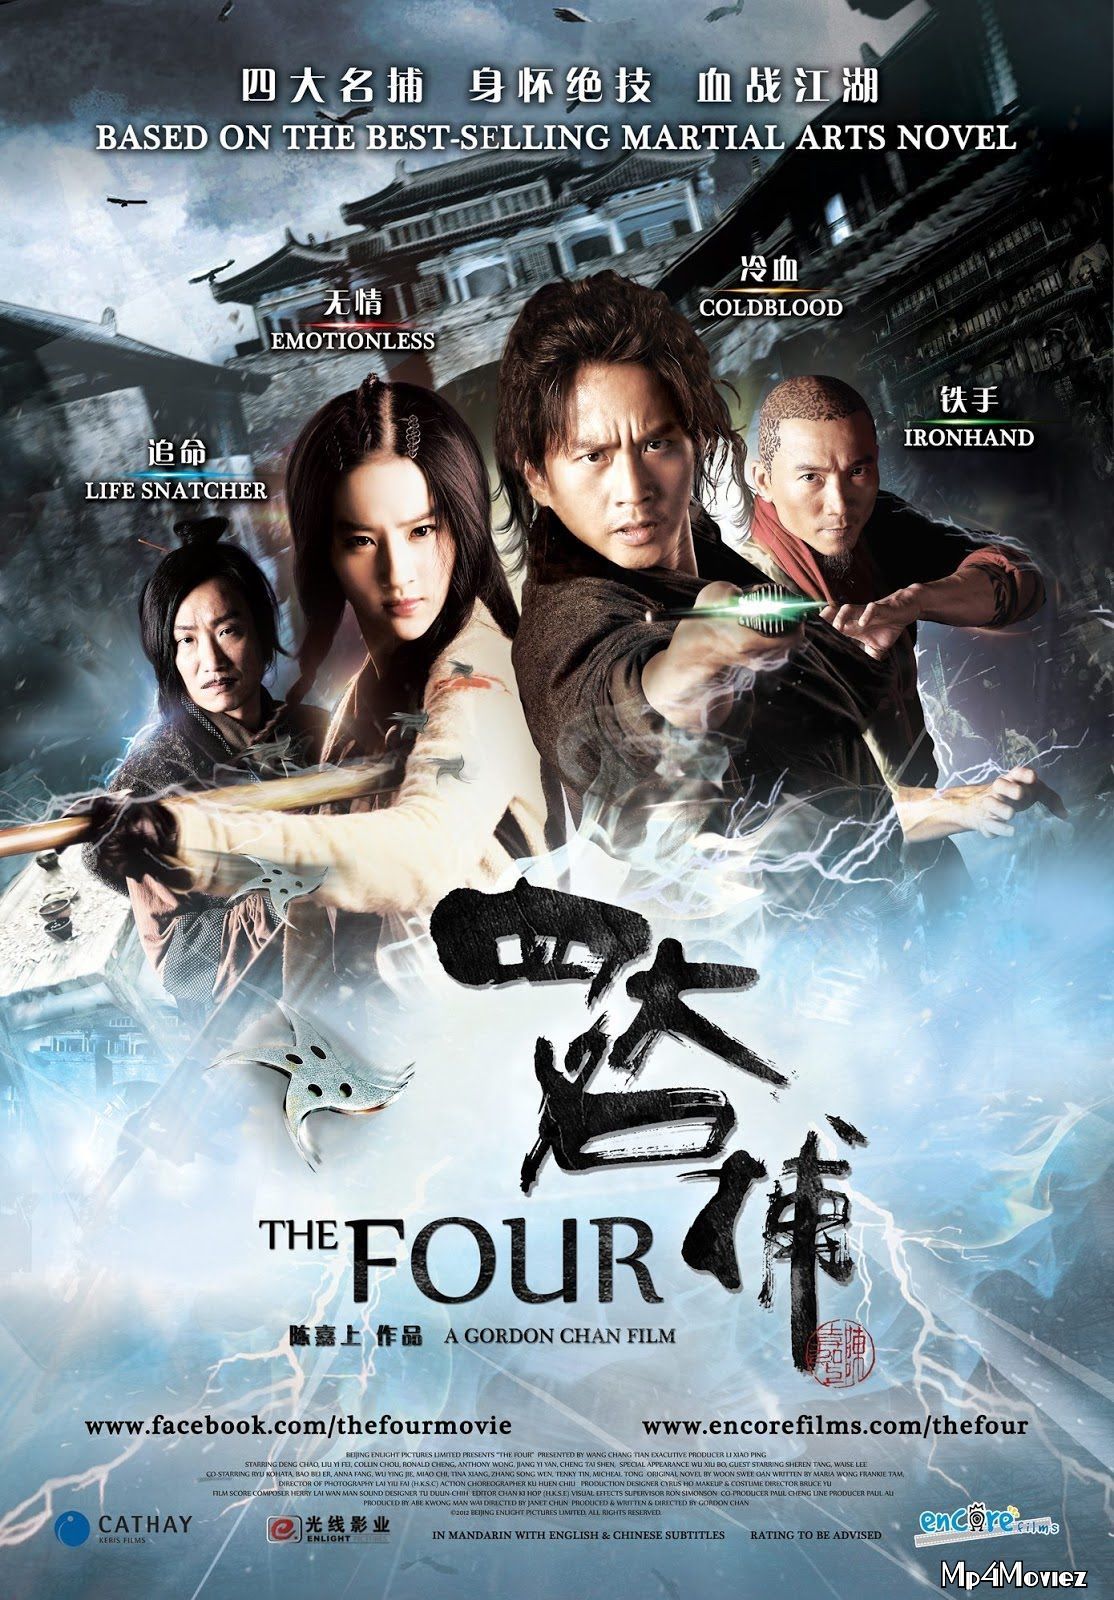 The Four 3 (2014) Hindi Dubbed Movie download full movie